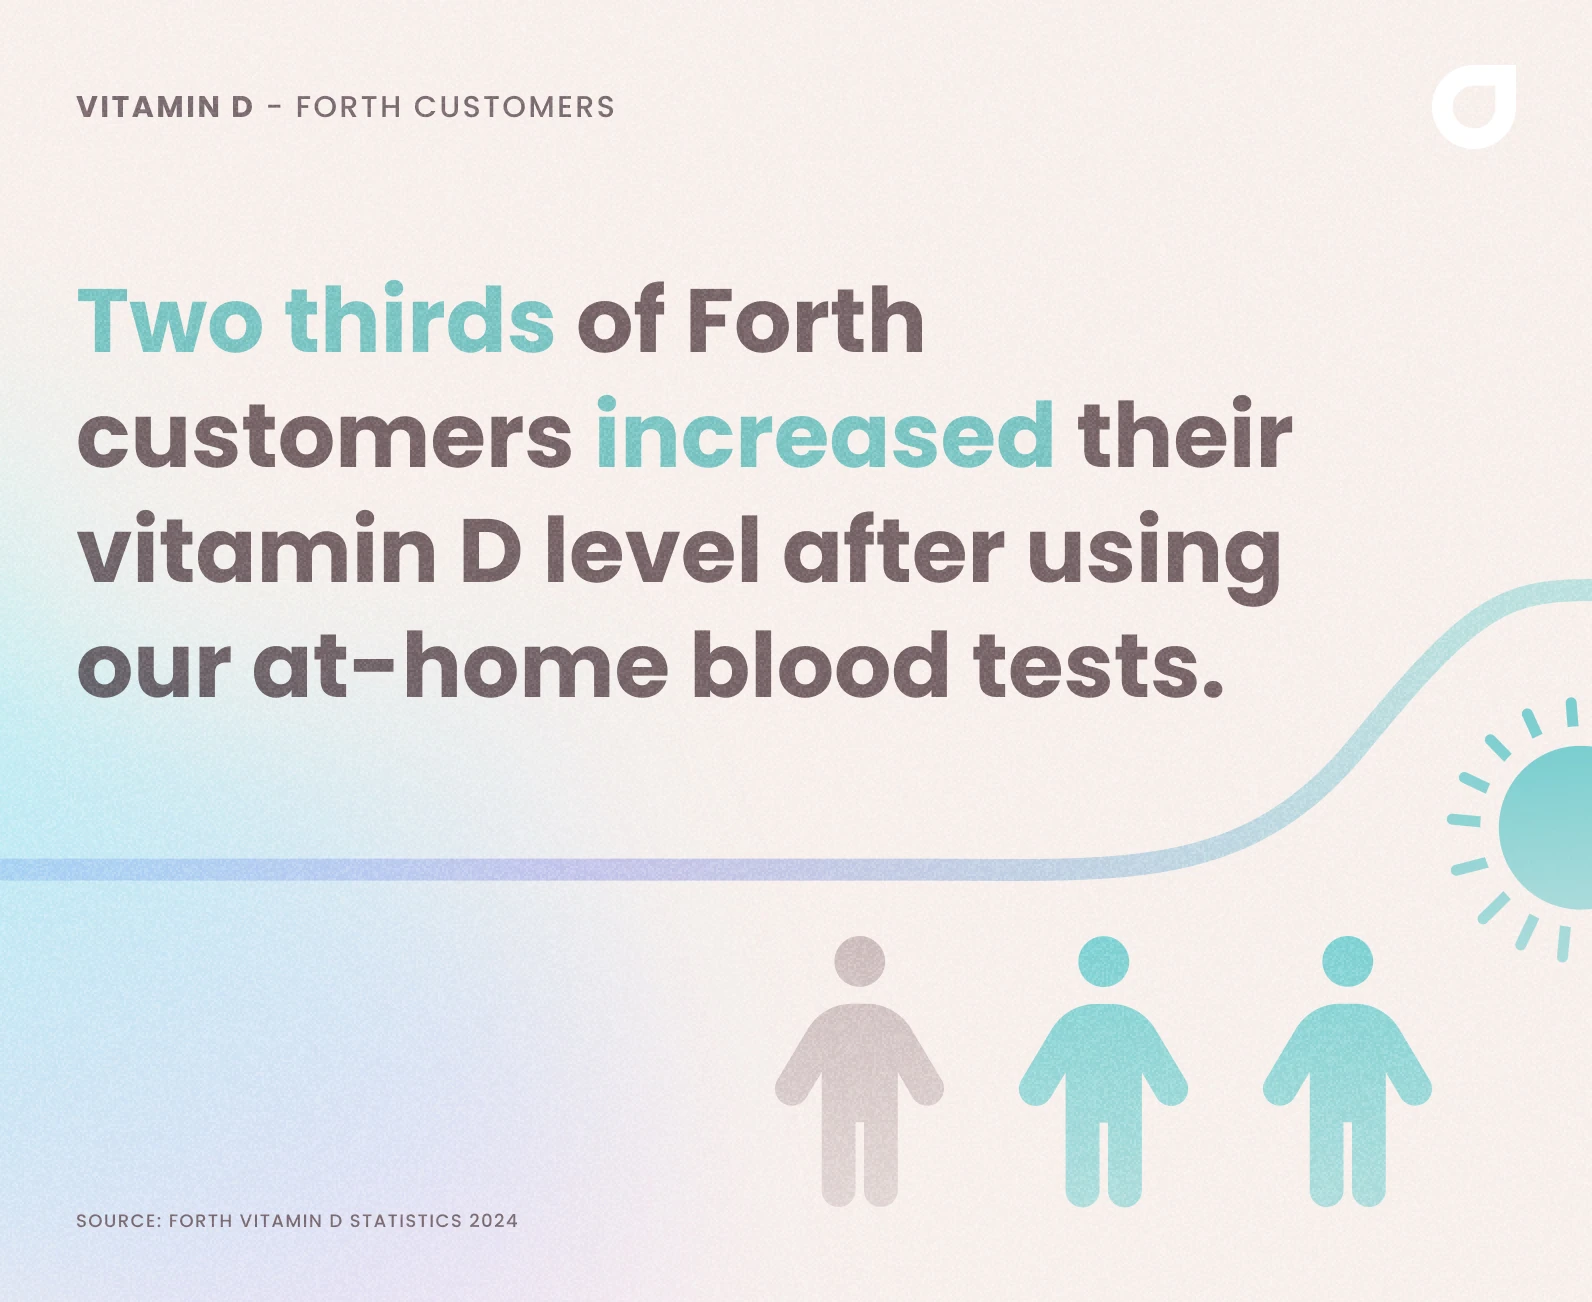 A graphic showing two-thirds of Forth customers improved their vitamin D levels after using a Forth home blood test